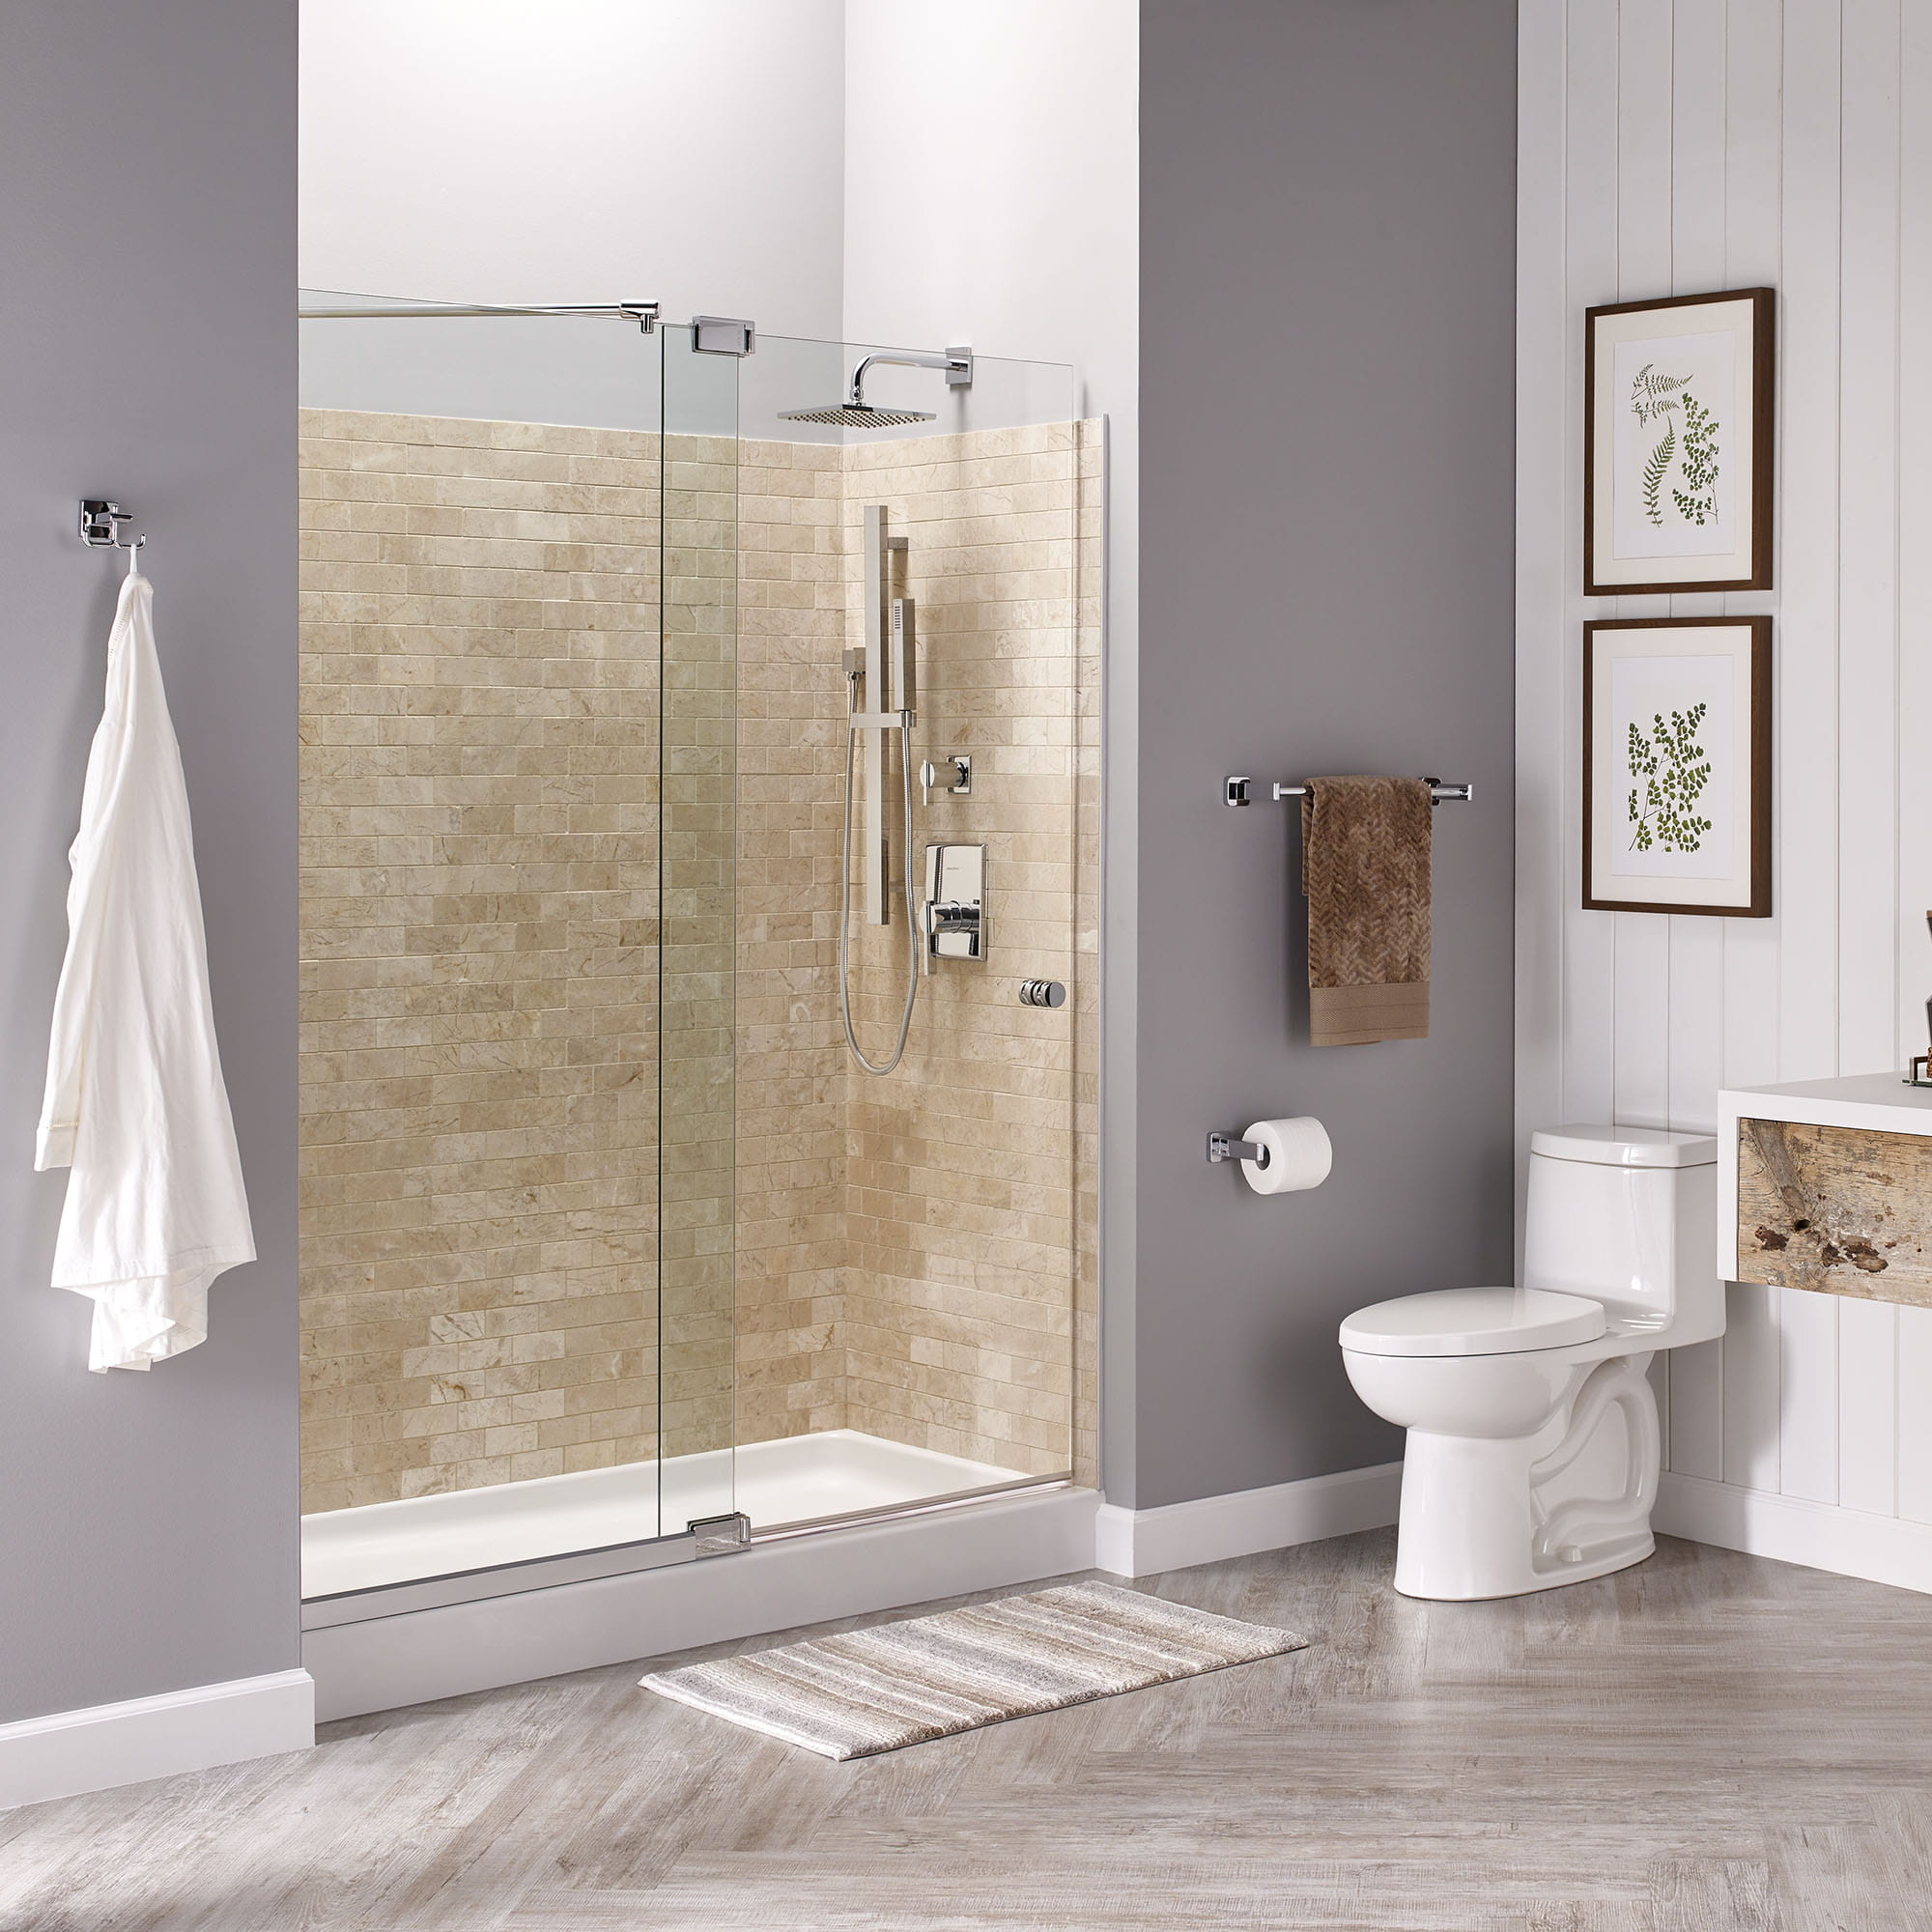 Studio 60x32 inch Single Threshold Shower base with Left hand Outlet ARCTIC